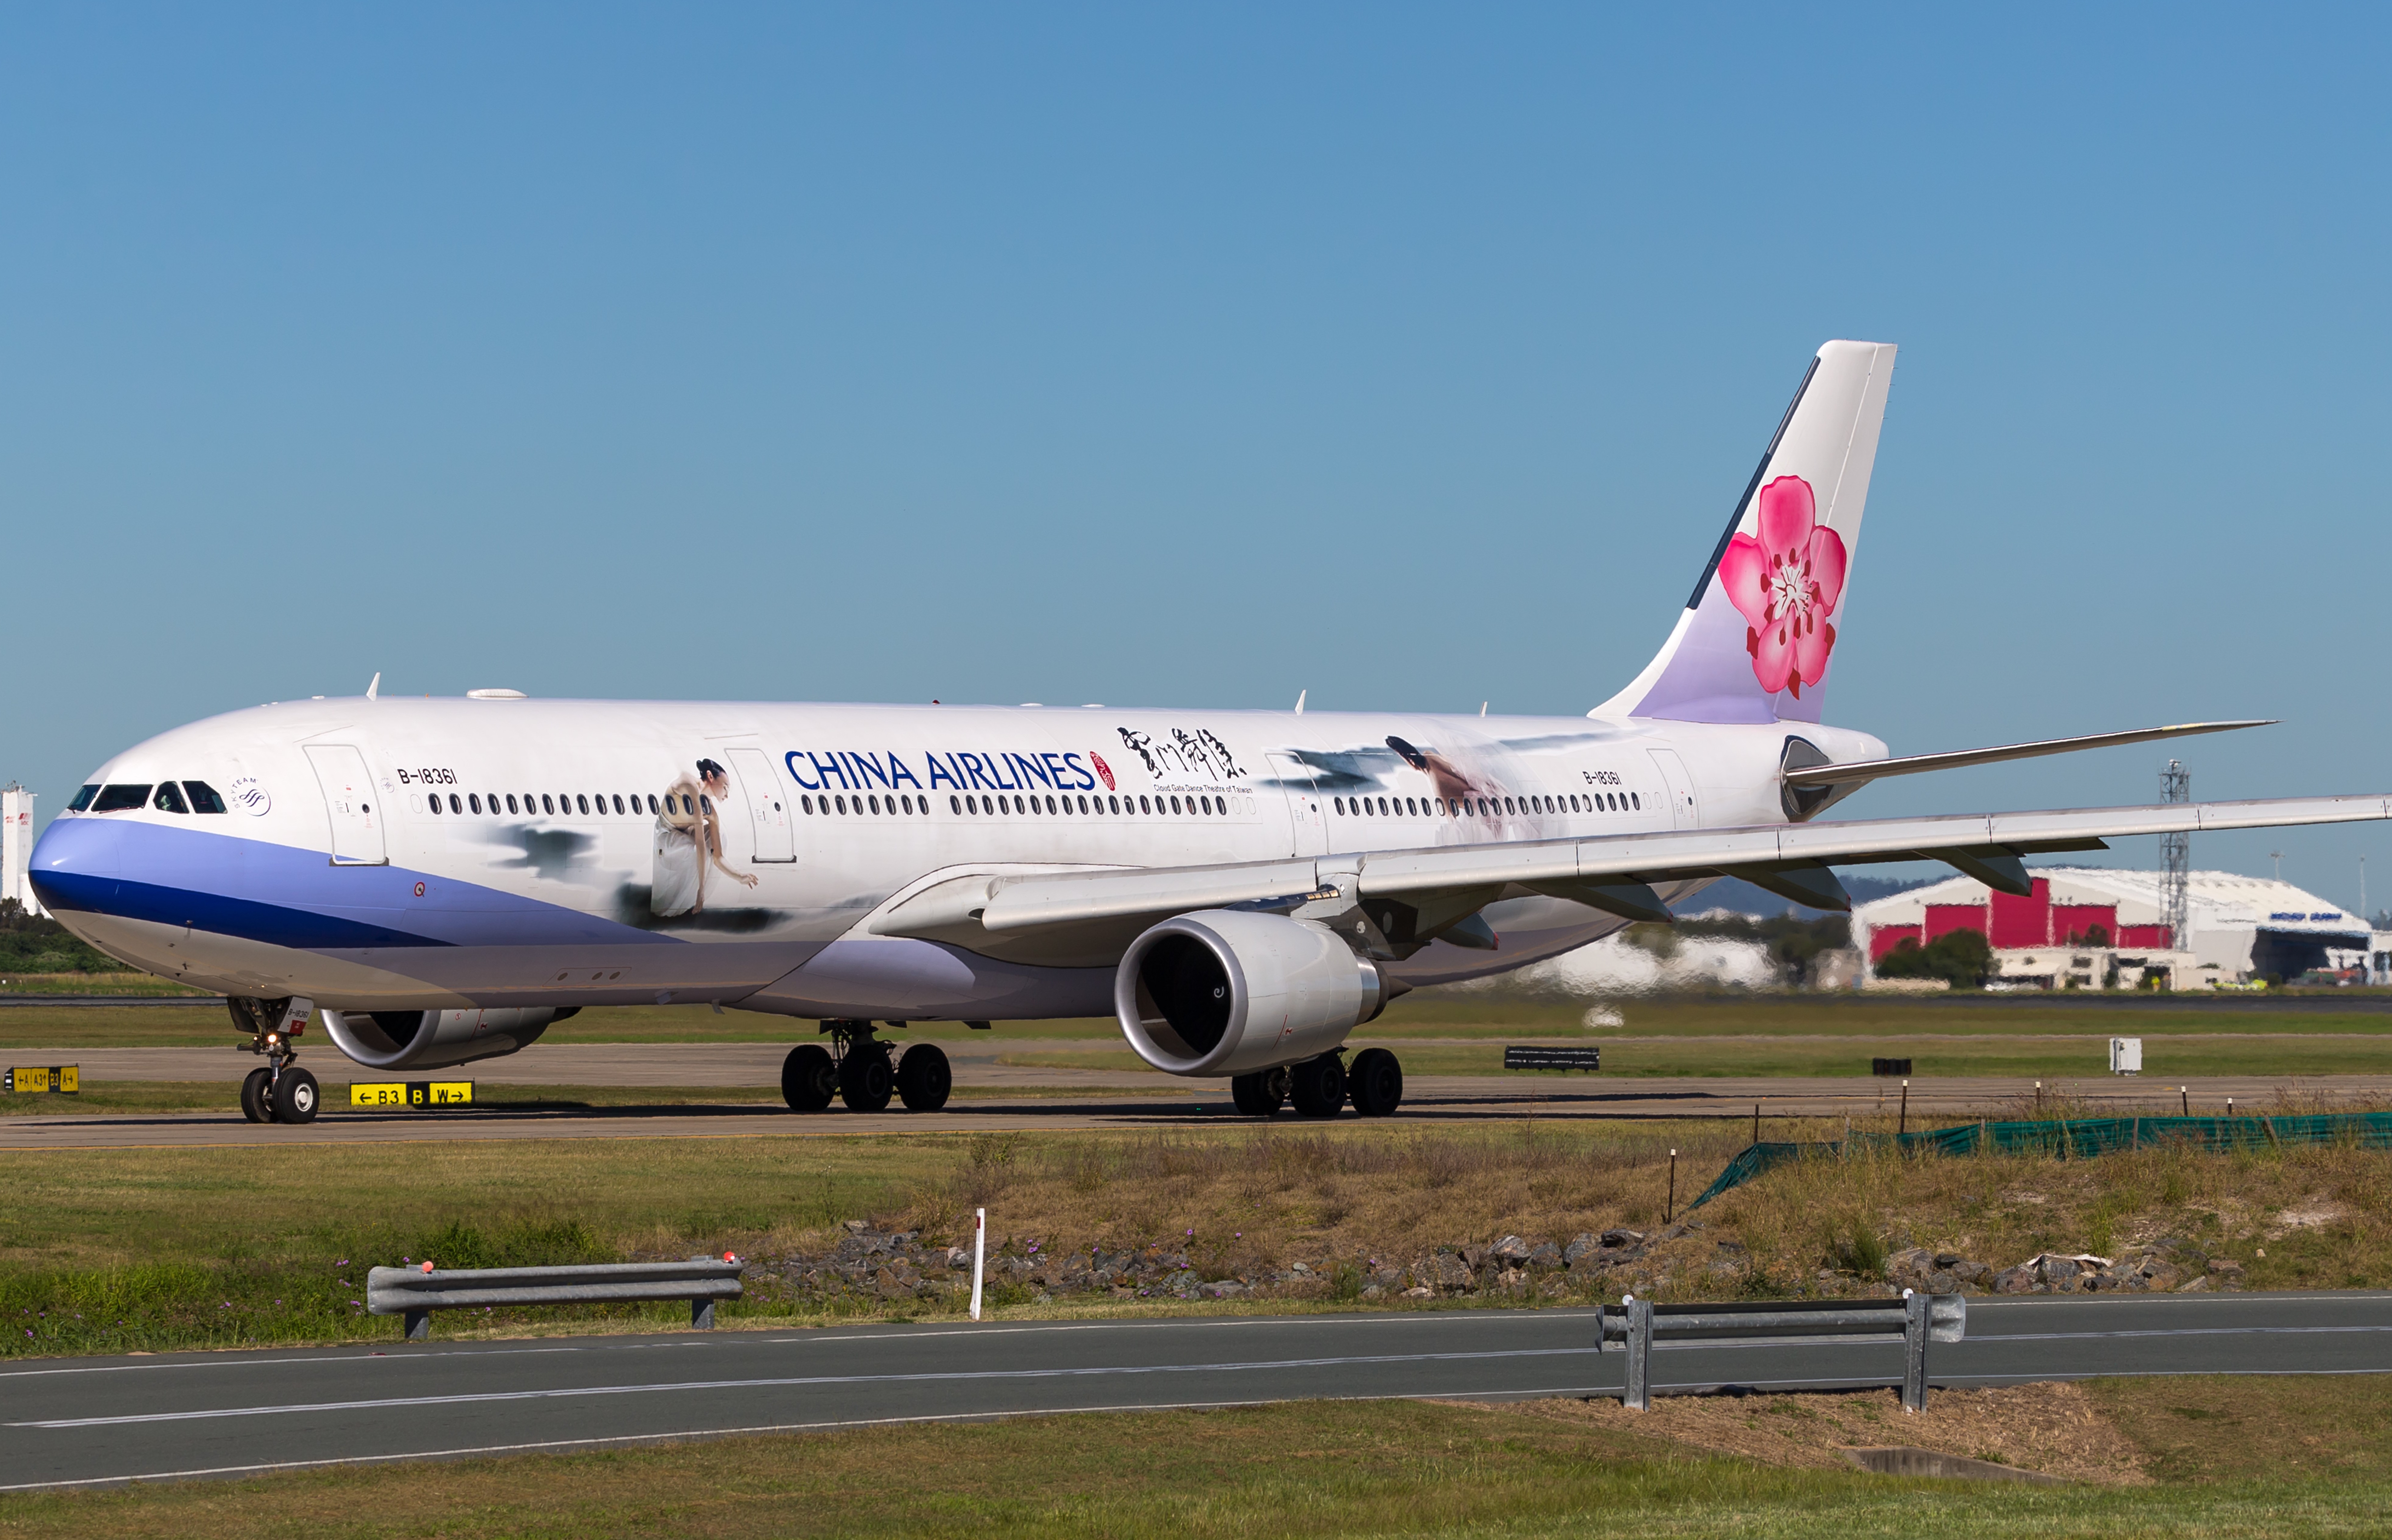 China Airlines - Credit Lance Broad